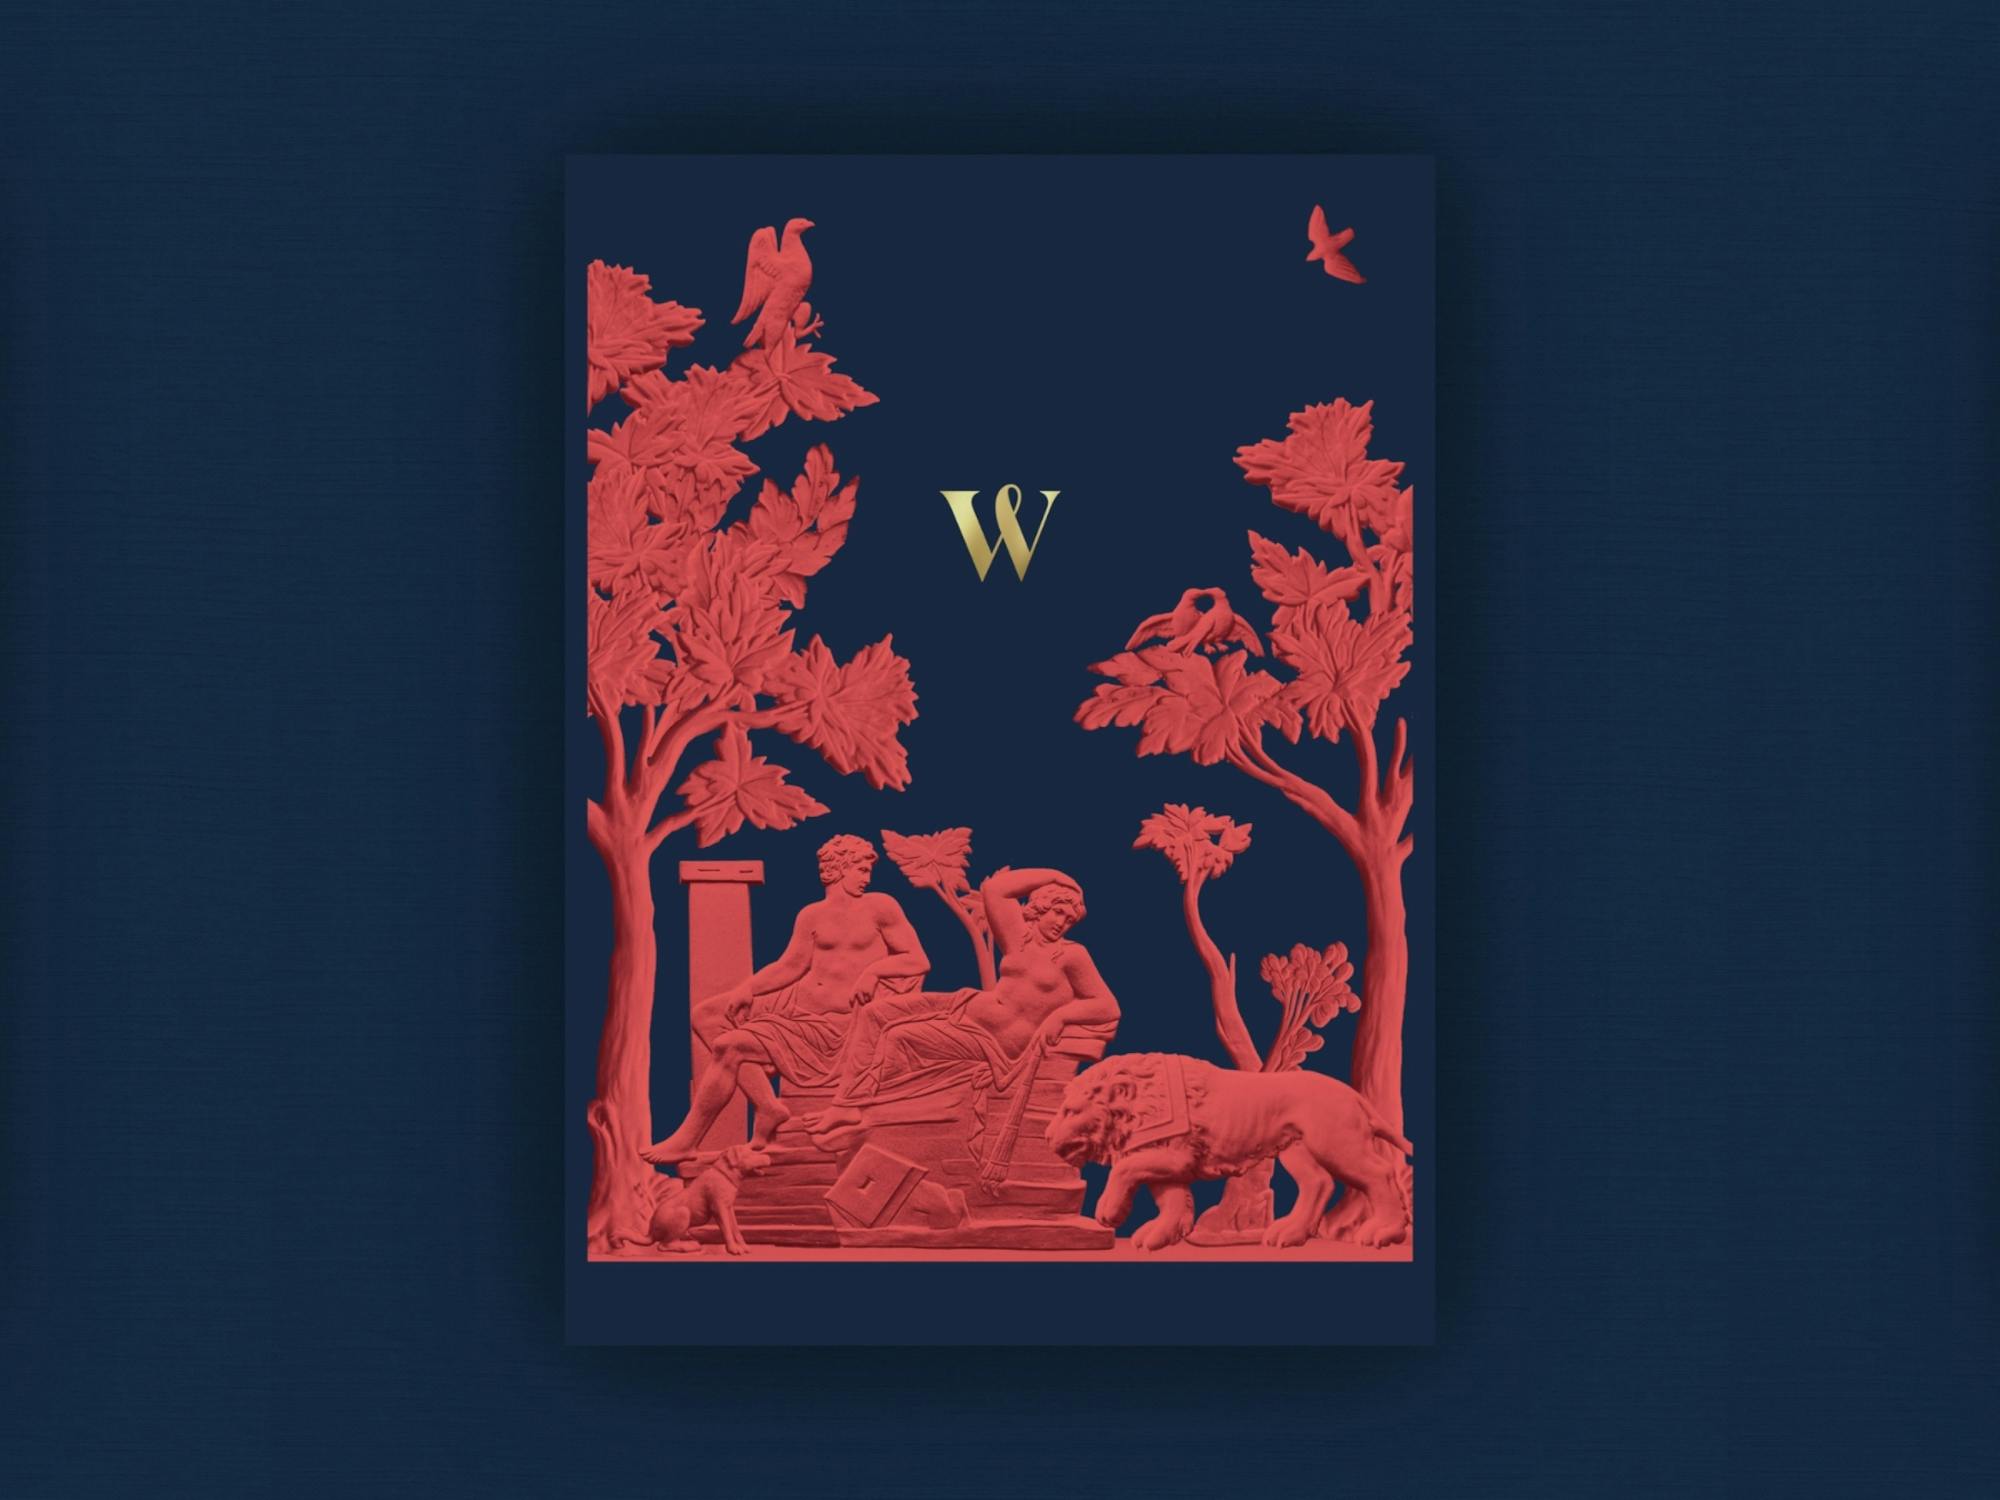 Book of British Luxury What to expect in the new issue of the Walpole Book of British Luxury 2023/2024 